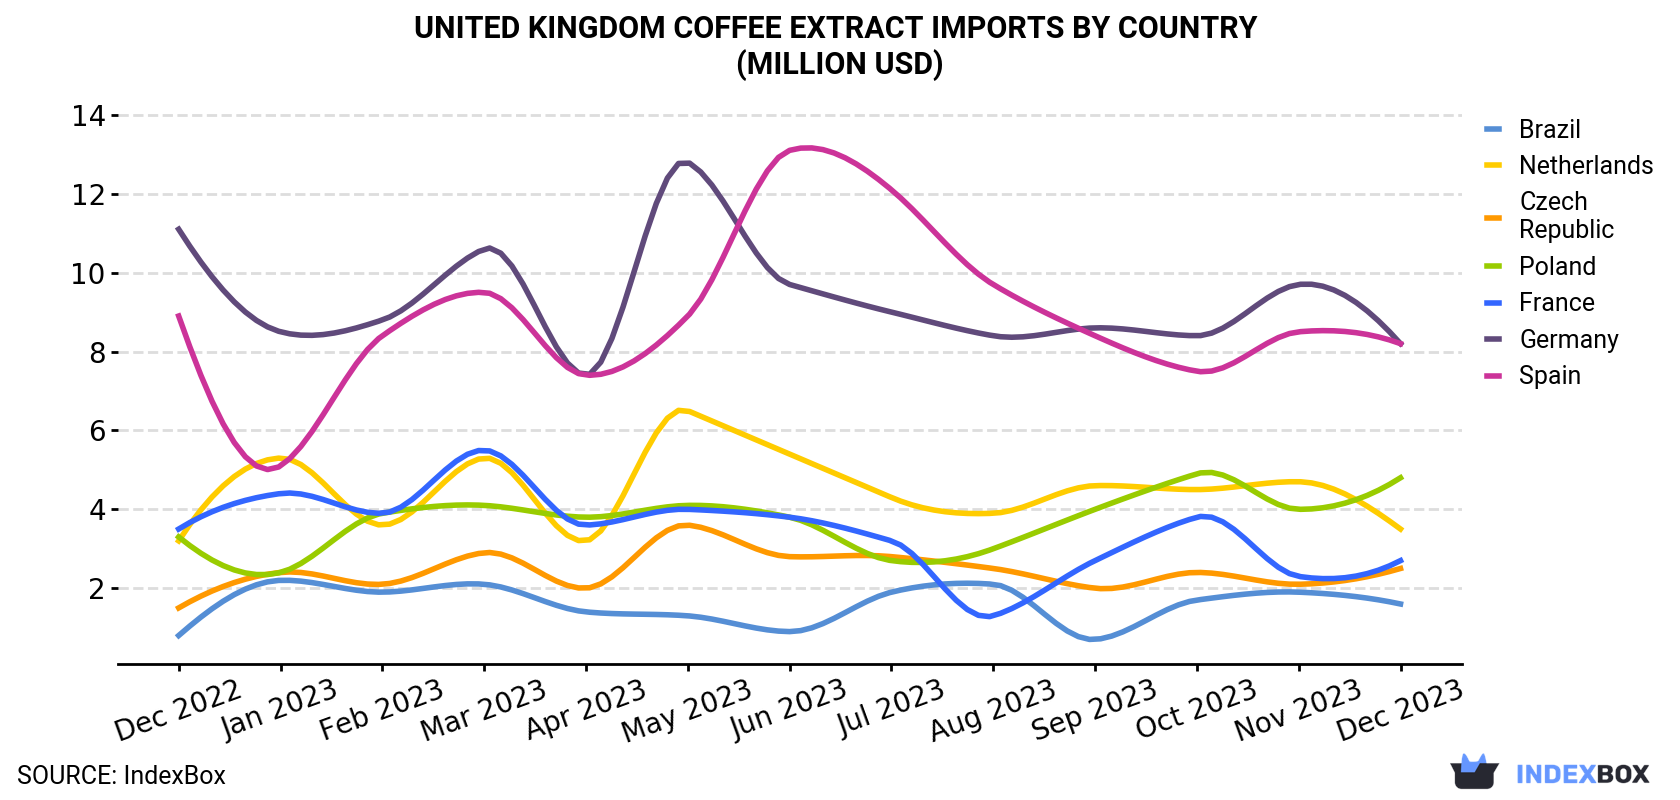 United Kingdom Coffee Extract Imports By Country (Million USD)